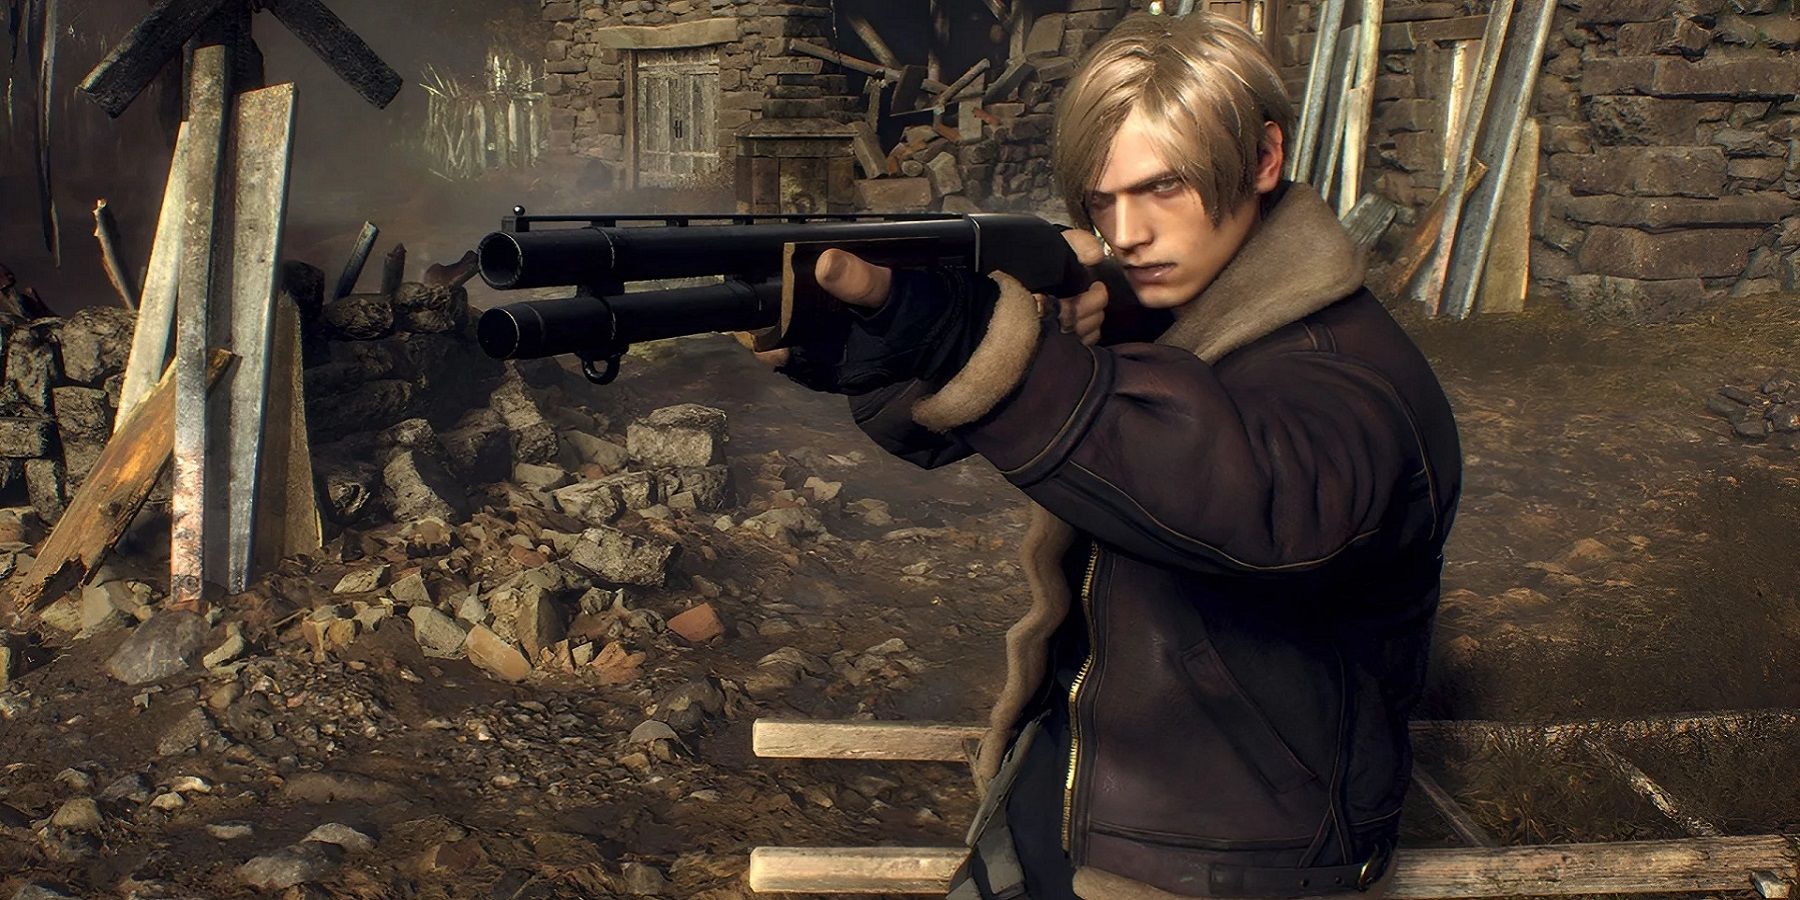 Image from the Resident Evil 4 remake showing Leon Kennedy pointing a shotgun off screen.